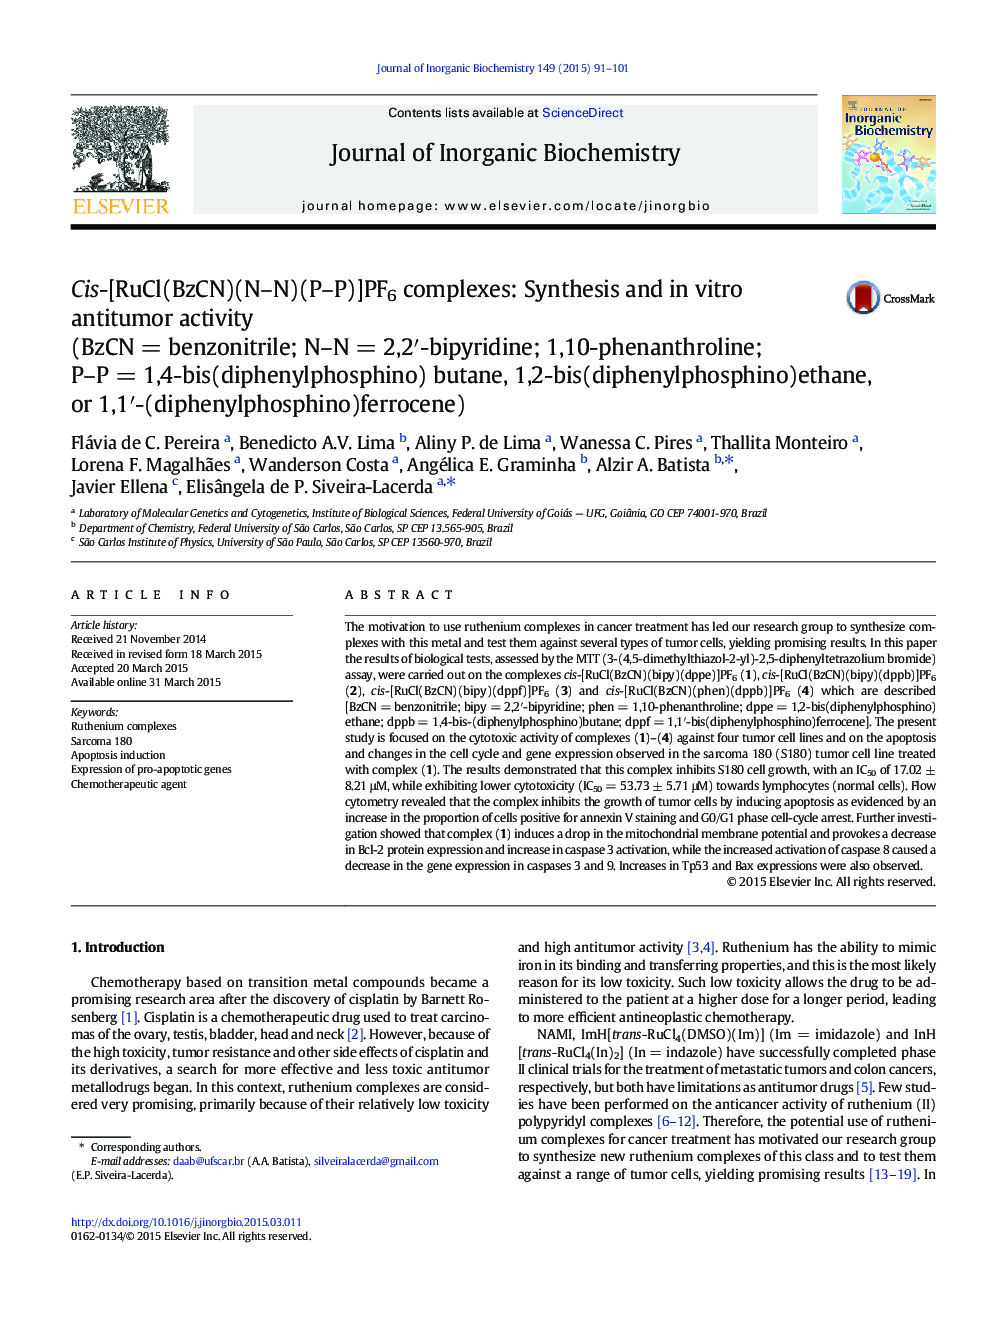 Cis-[RuCl(BzCN)(N–N)(P–P)]PF6 complexes: Synthesis and in vitro antitumor activity: (BzCN = benzonitrile; N–N = 2,2′-bipyridine; 1,10-phenanthroline; P–P = 1,4-bis(diphenylphosphino) butane, 1,2-bis(diphenylphosphino)ethane, or 1,1′-(diphenylphosphino)fer